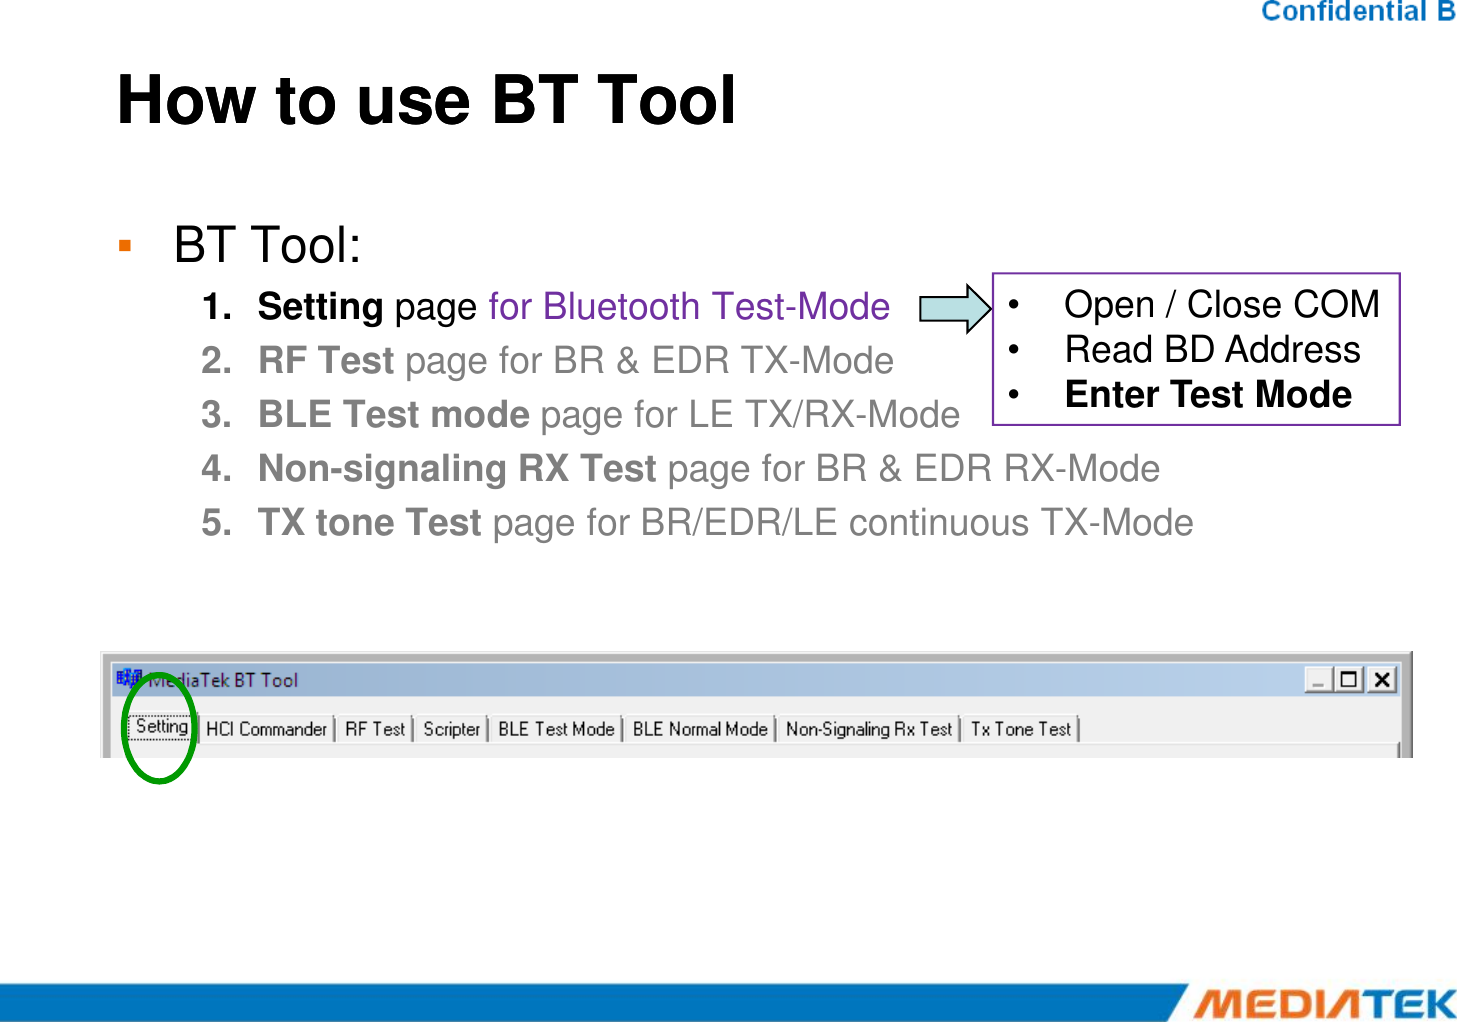 How to use BT ToolHow to use BT Tool▪BT Tool:1.Setting page for Bluetooth Test-Mode 2.RF Test page for BR &amp; EDR TX-Mode 3.BLE Test mode page for LE TX/RX-Mode 4.Non-signaling RX Test page for BR &amp; EDR RX-Mode 5.TX tone Test page for BR/EDR/LE continuous TX-Mode •Open / Close COM•ReadBD Address•Enter Test Mode 5.TX tone Test page for BR/EDR/LE continuous TX-Mode 